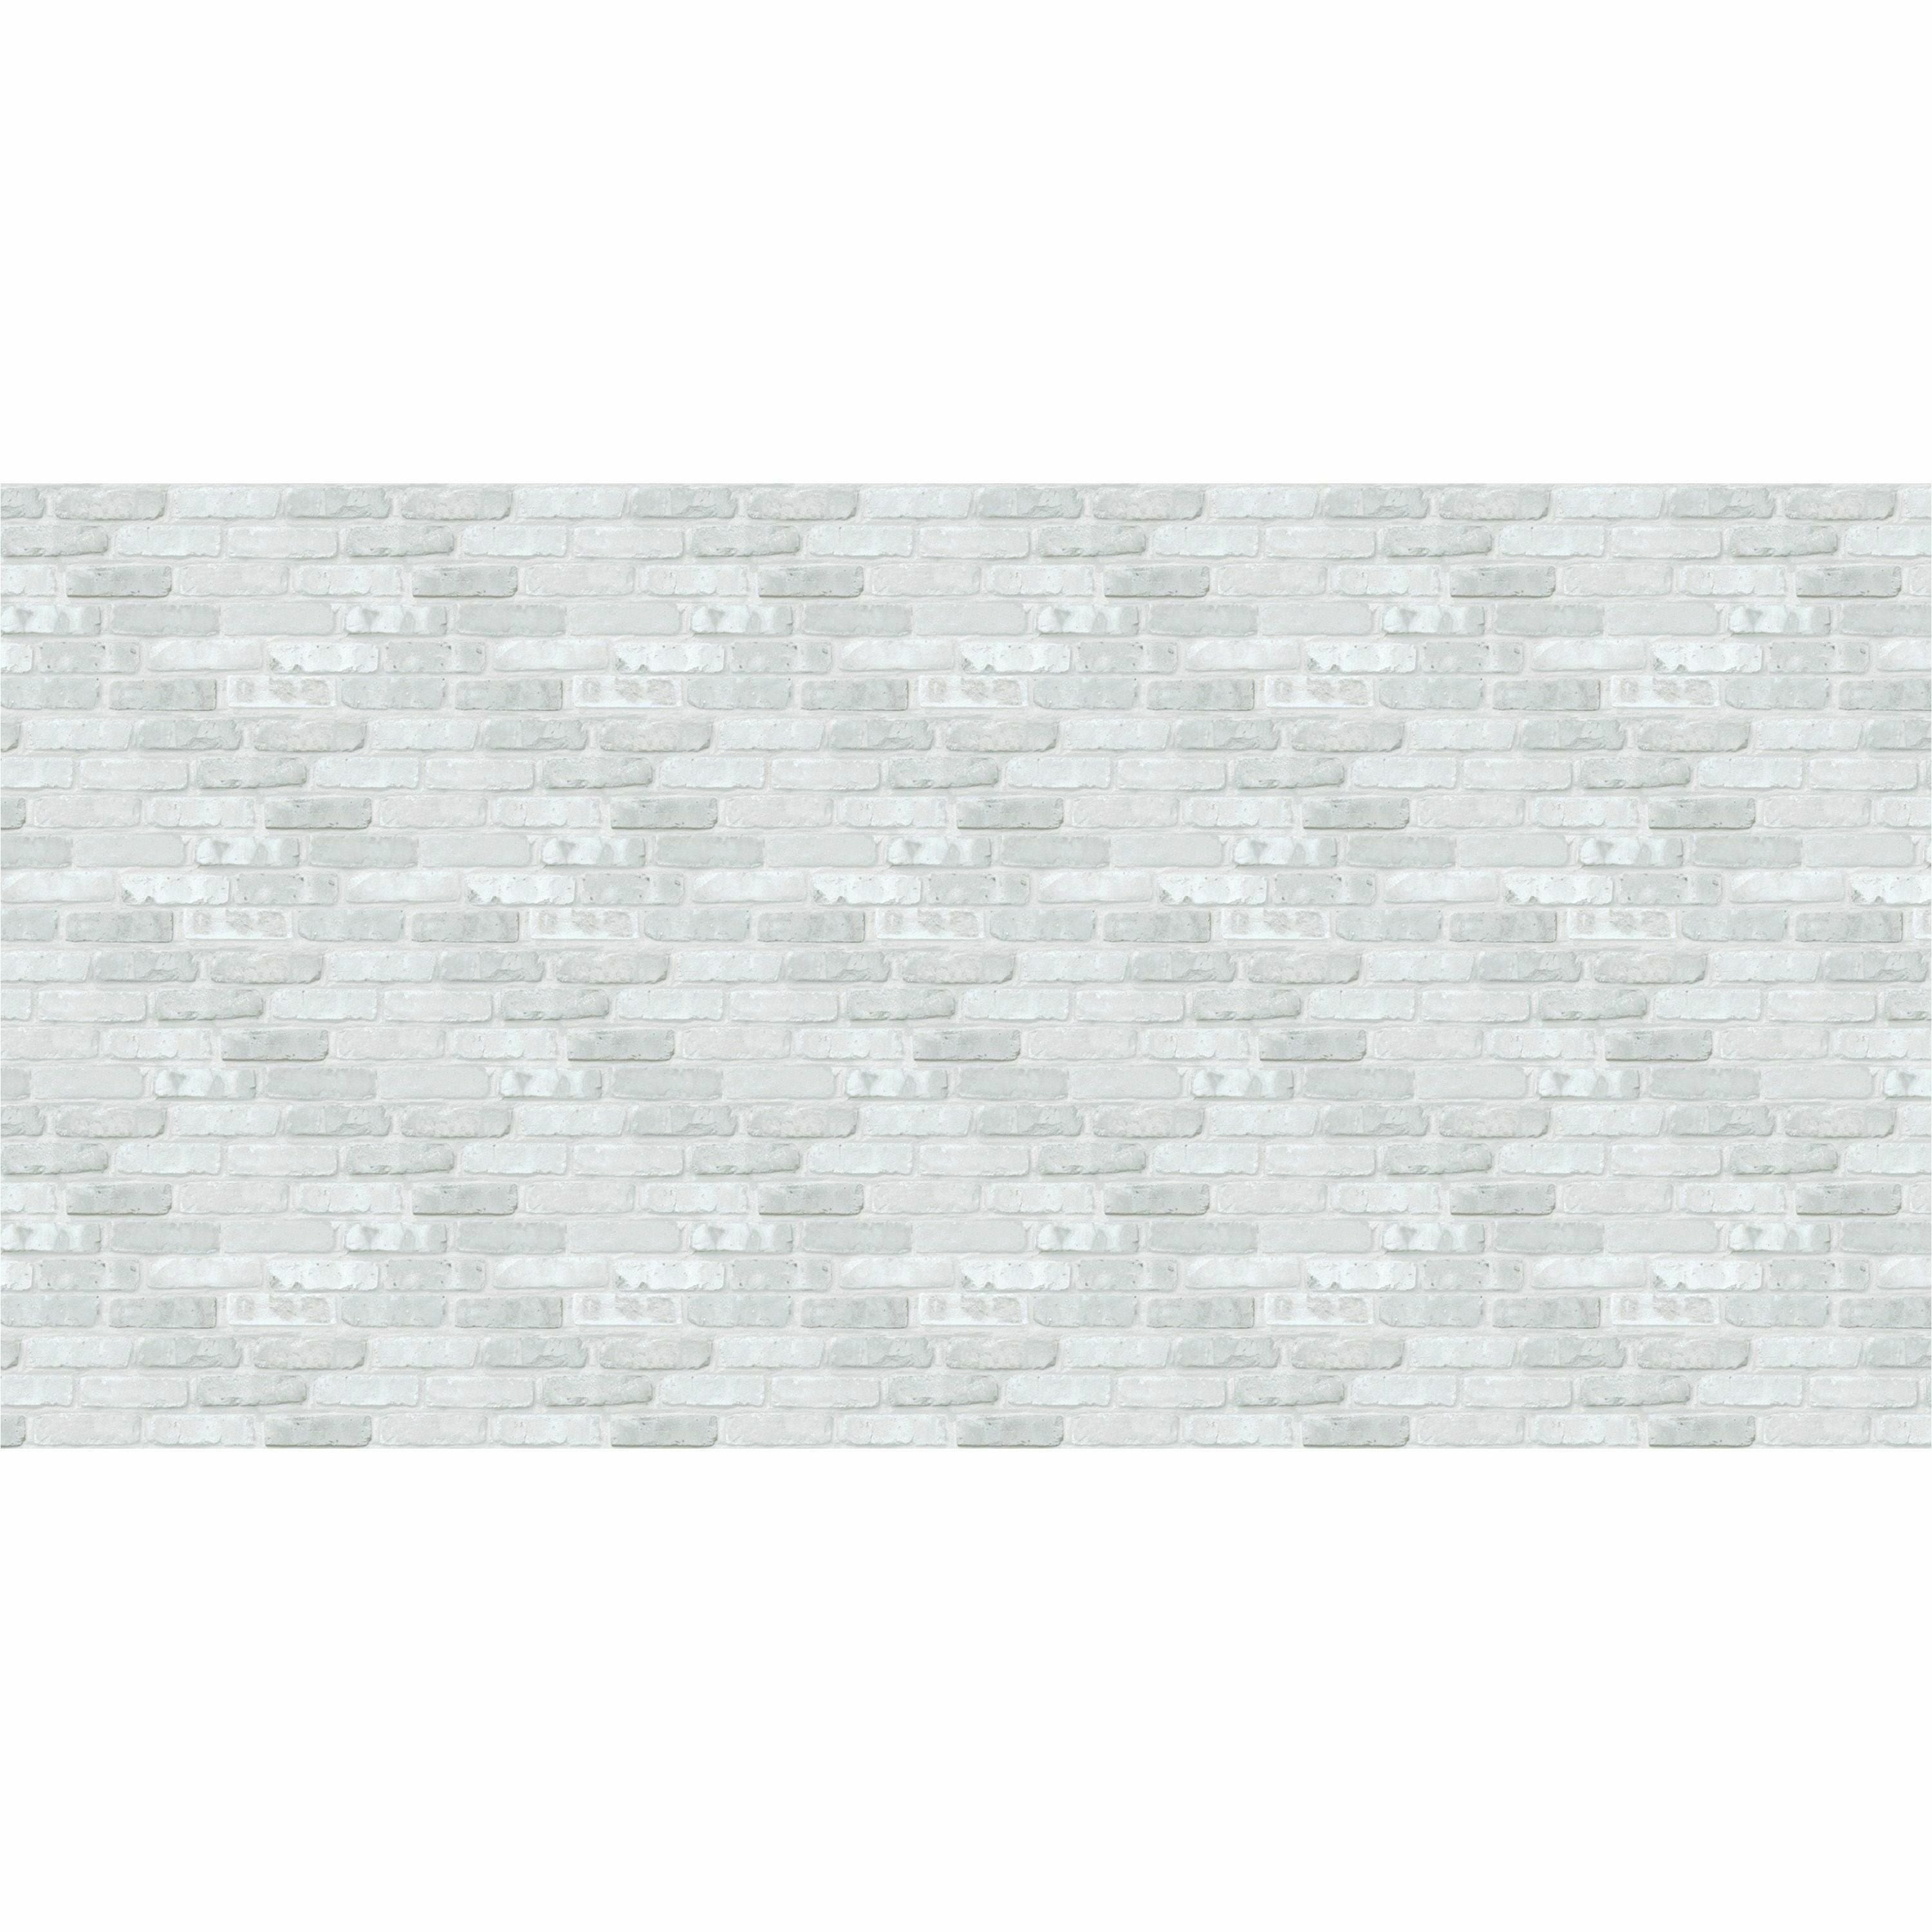 fadeless-designs-paper-roll-art-project-craft-project-bulletin-board-school-office-home-48width-x-50length-1-roll-white-gray_pacp56905 - 2